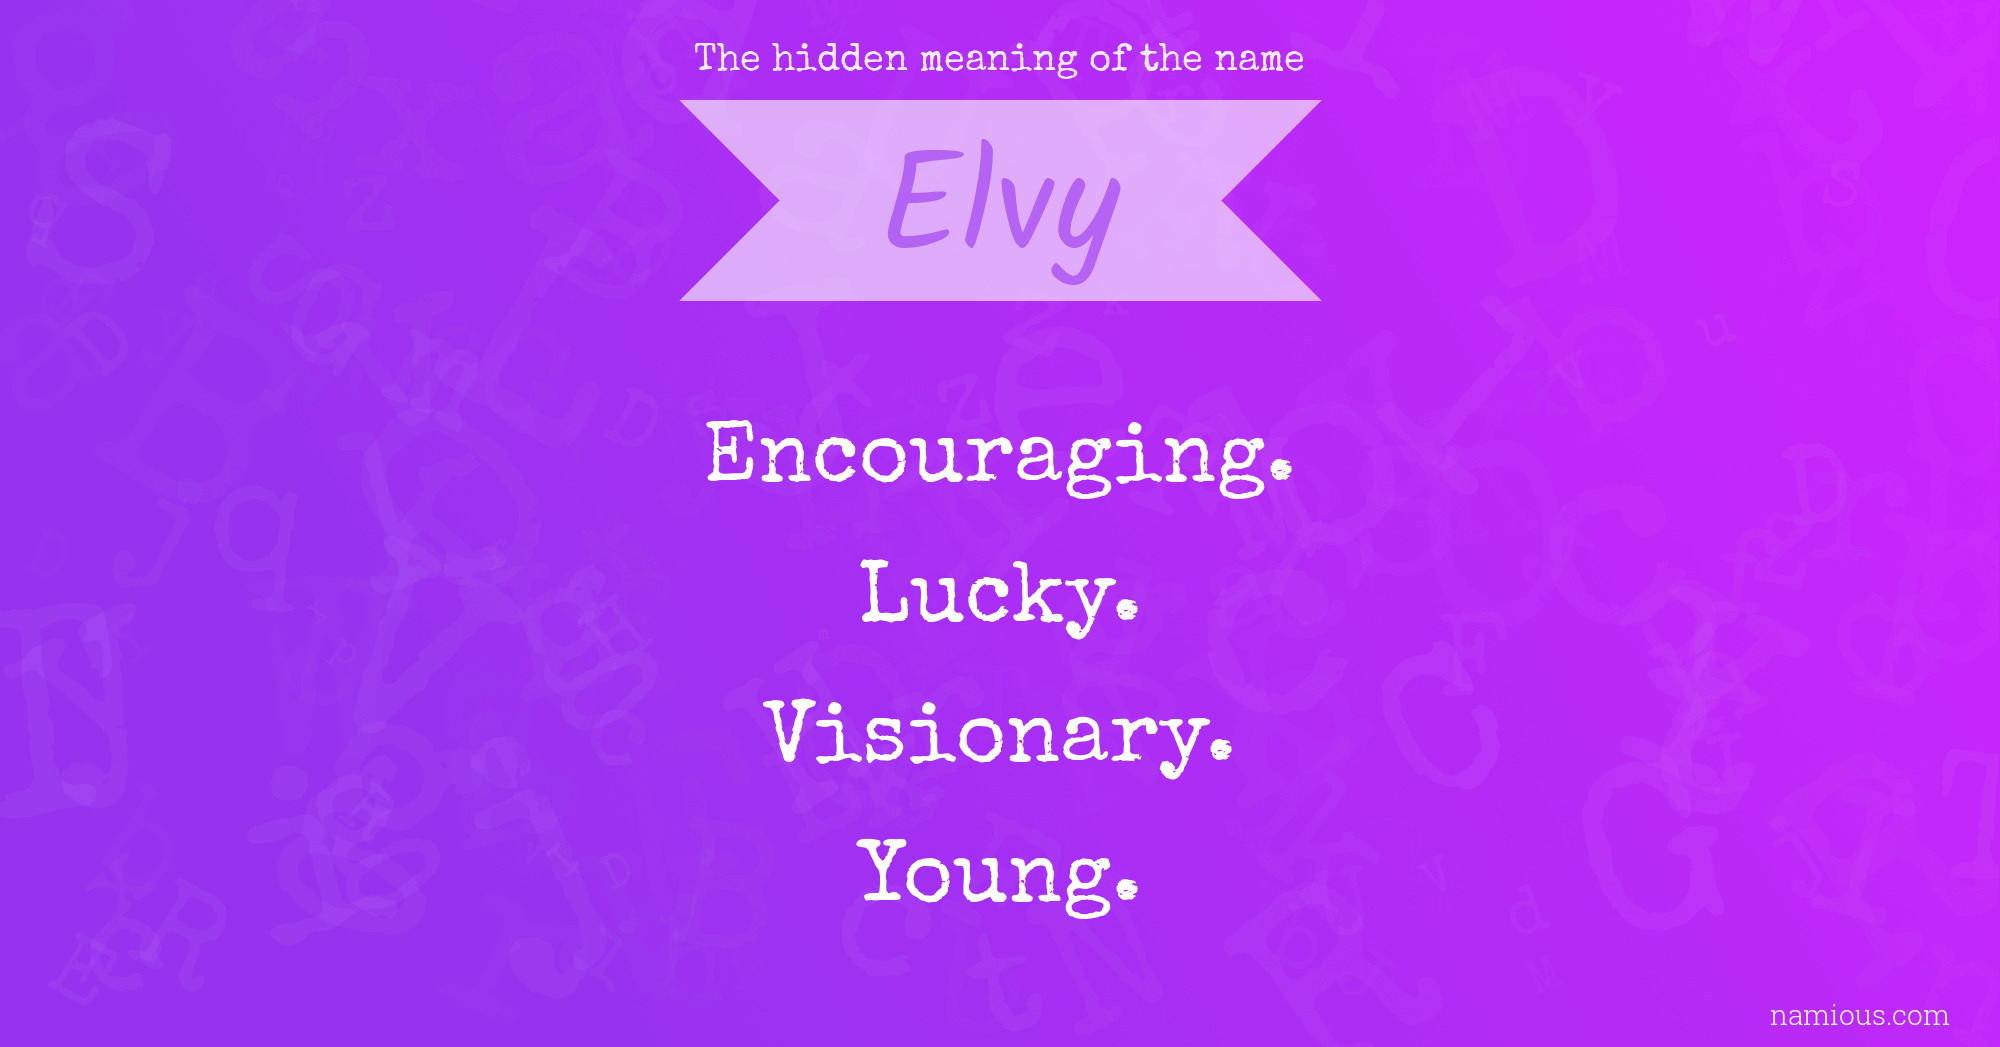 The hidden meaning of the name Elvy